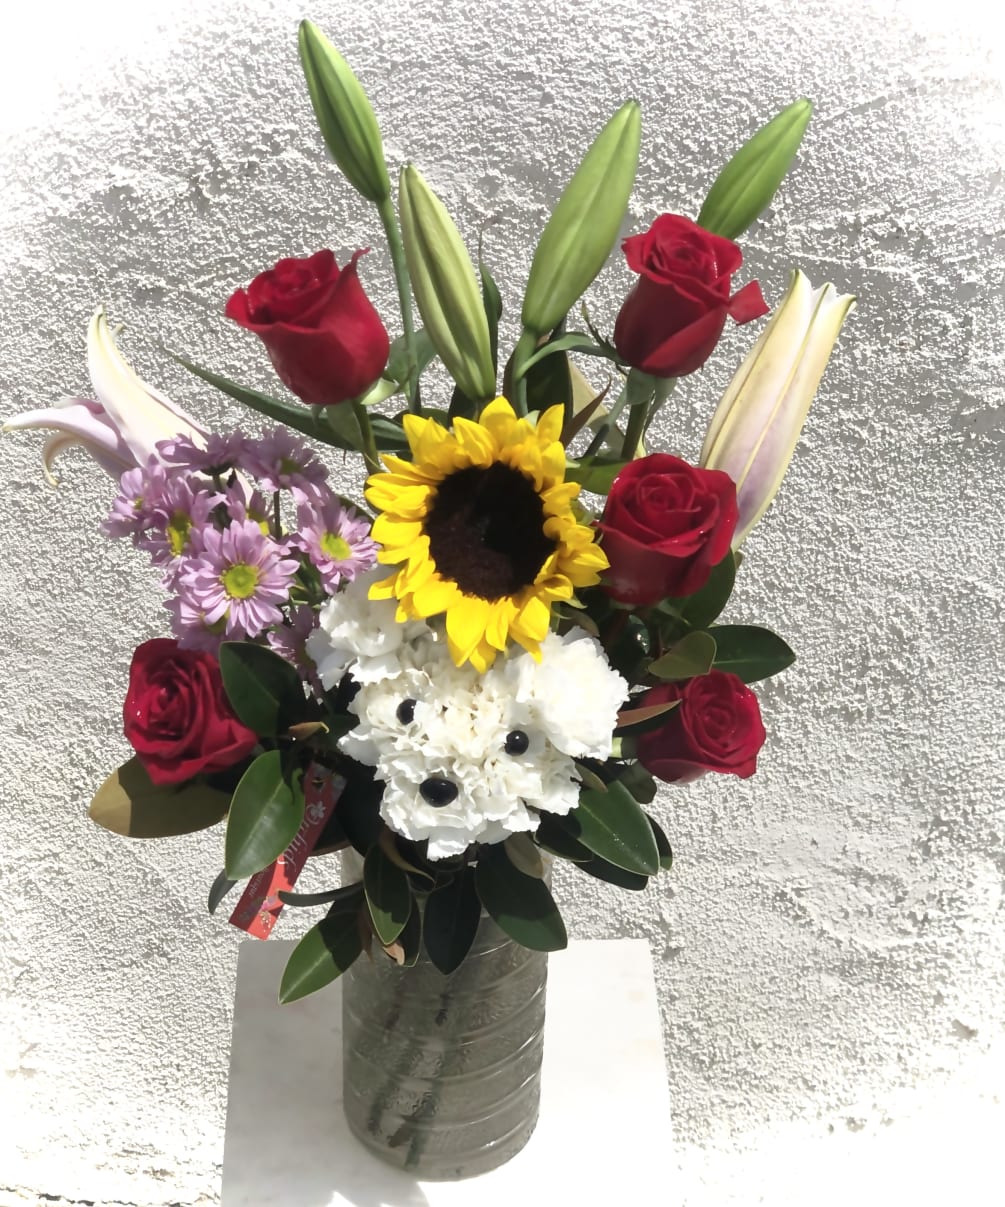  This customer favorite floral creation makes a great gift whether you&rsquo;re